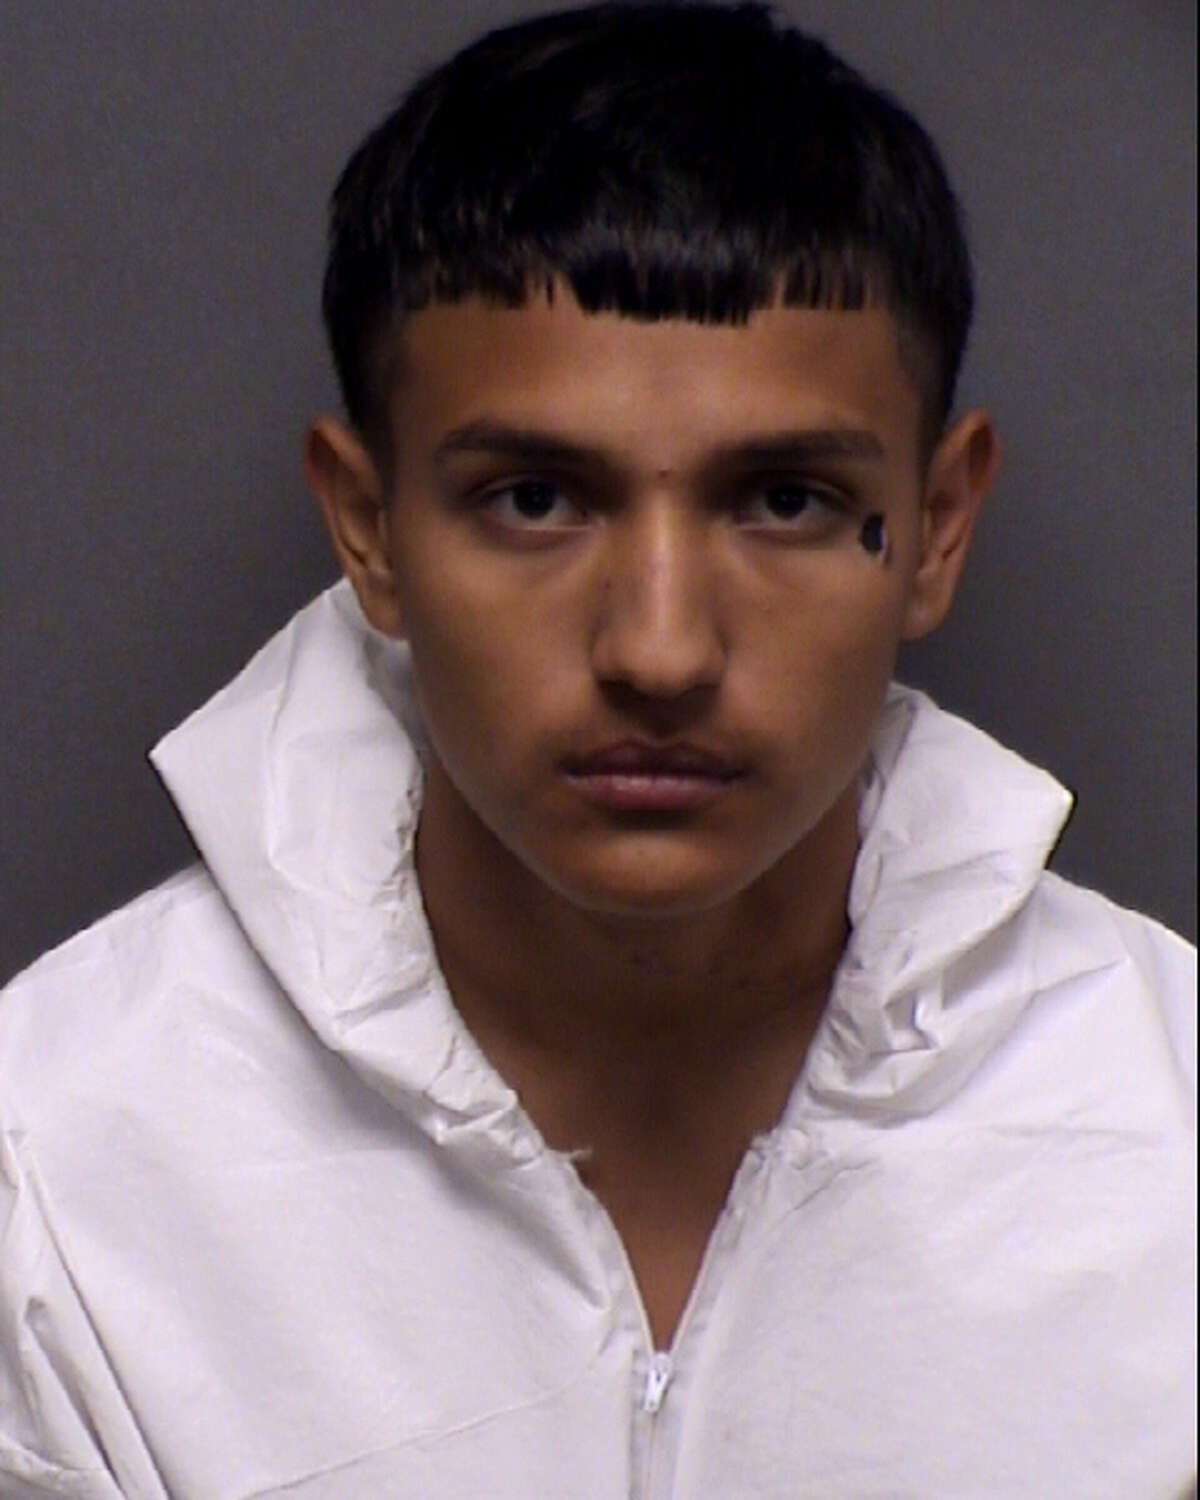 Zion Michael Talavera, 20, was charged with capital murder Sunday, Feb. 28, 2021. The new charge was brought against him after the owner of an East Side convenience store, who was shot during a robbery in July 2019, died from his injuries in December.